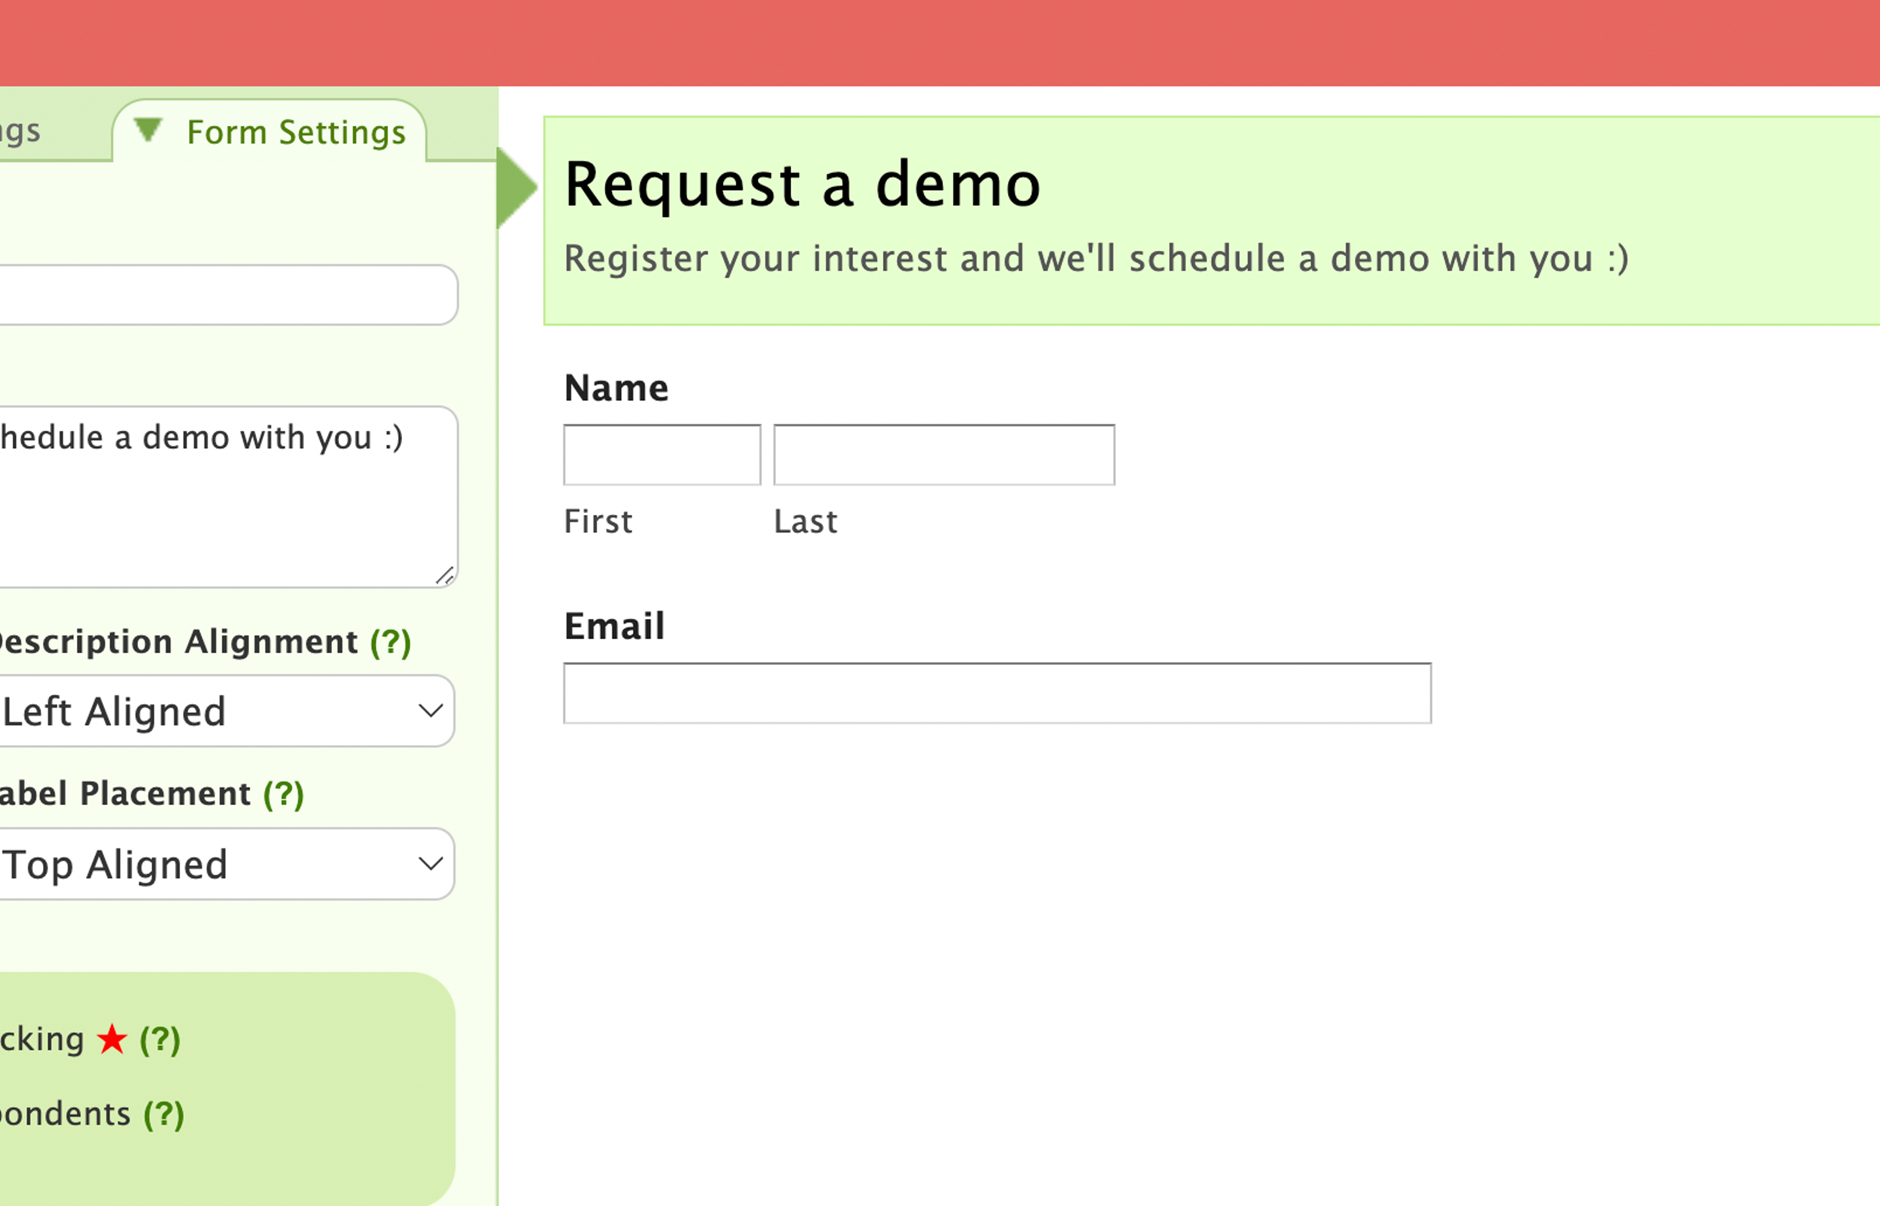 A simple Wufoo form is being built, collecting name and email address data.